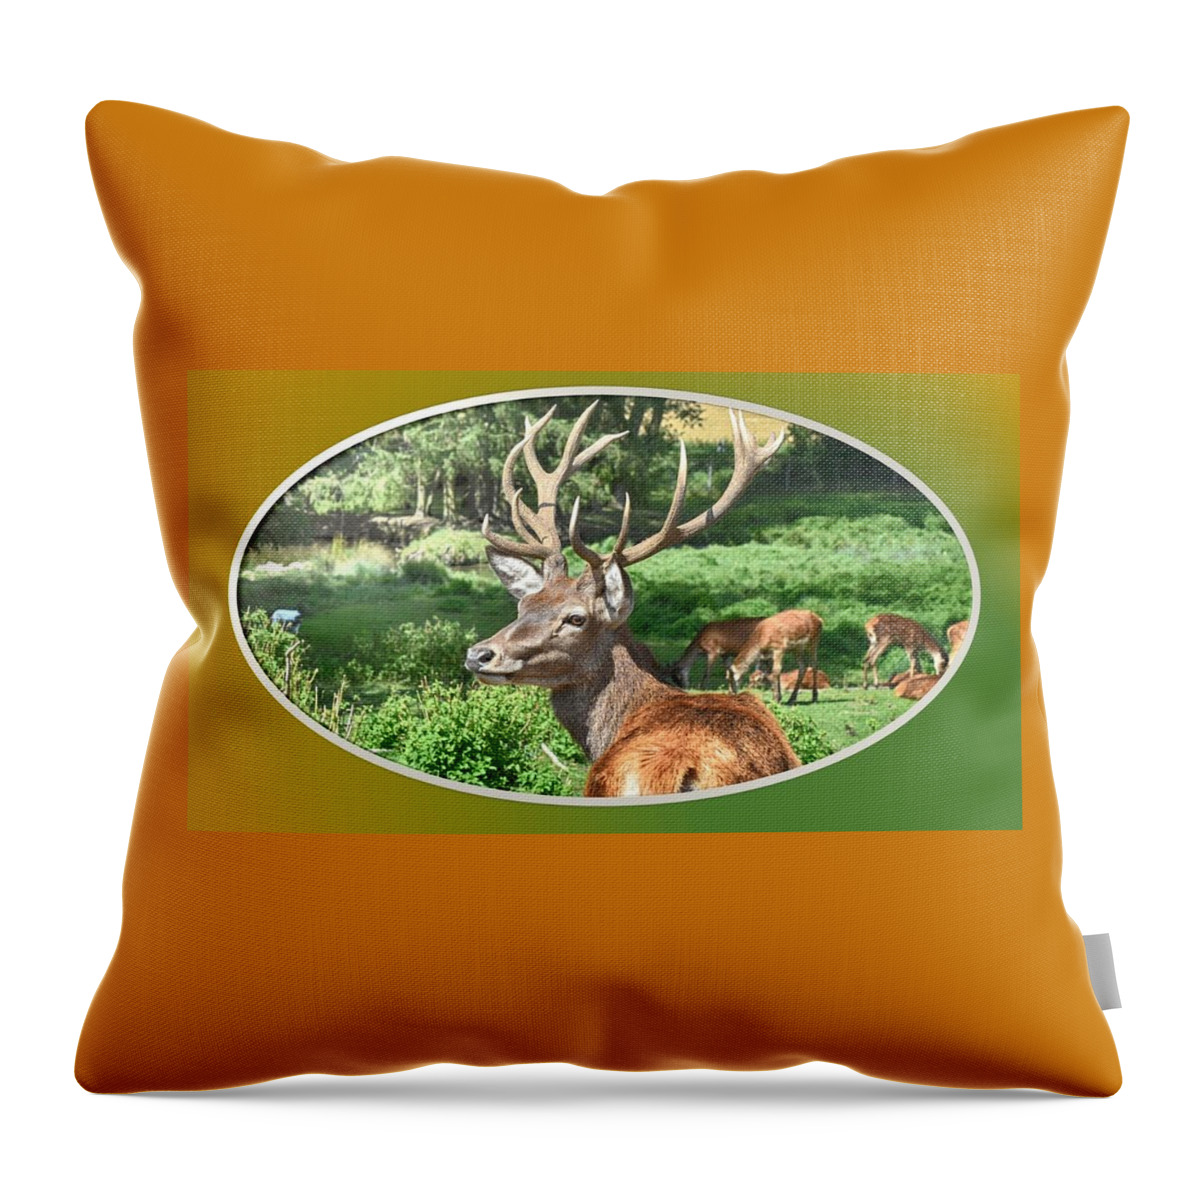 Deer Throw Pillow featuring the photograph Deer with Antlers by Nancy Ayanna Wyatt